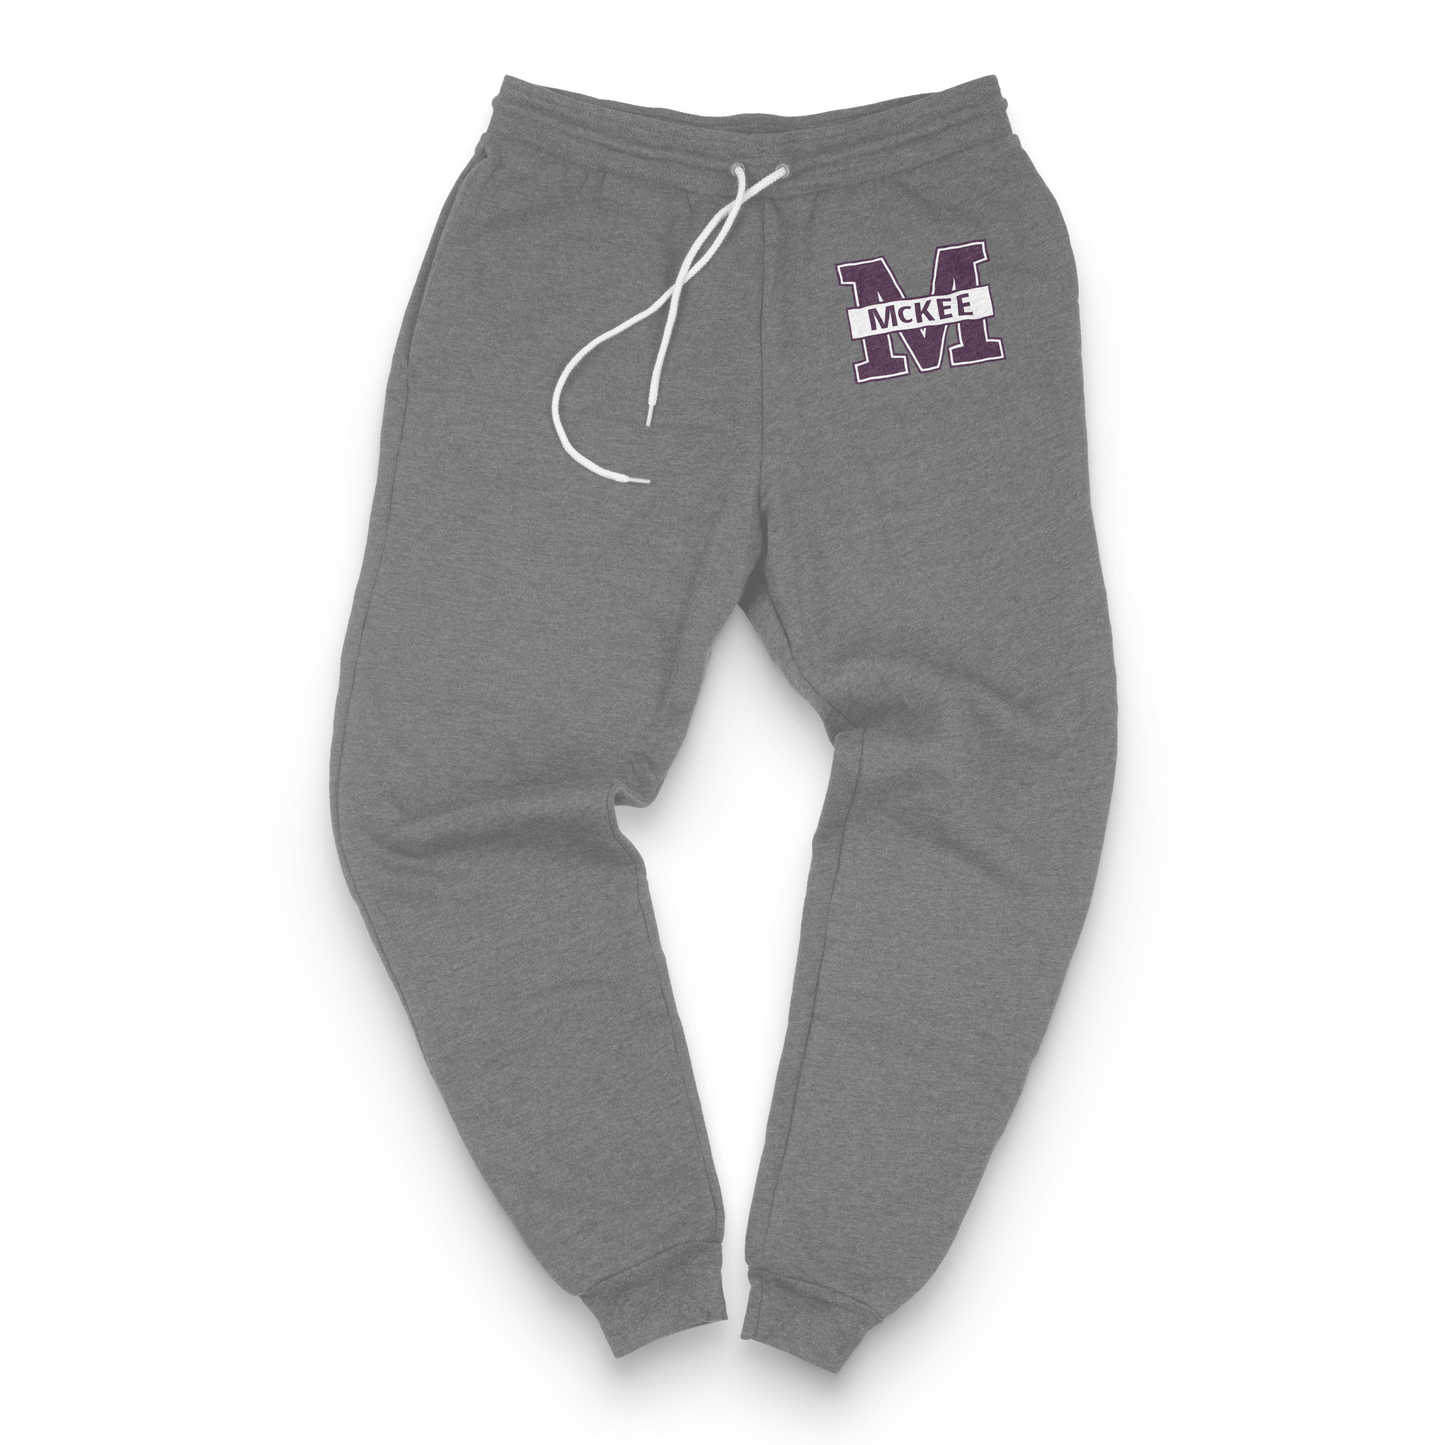 McKee University Sweatpants - Officially Licensed Beyond The Play Series